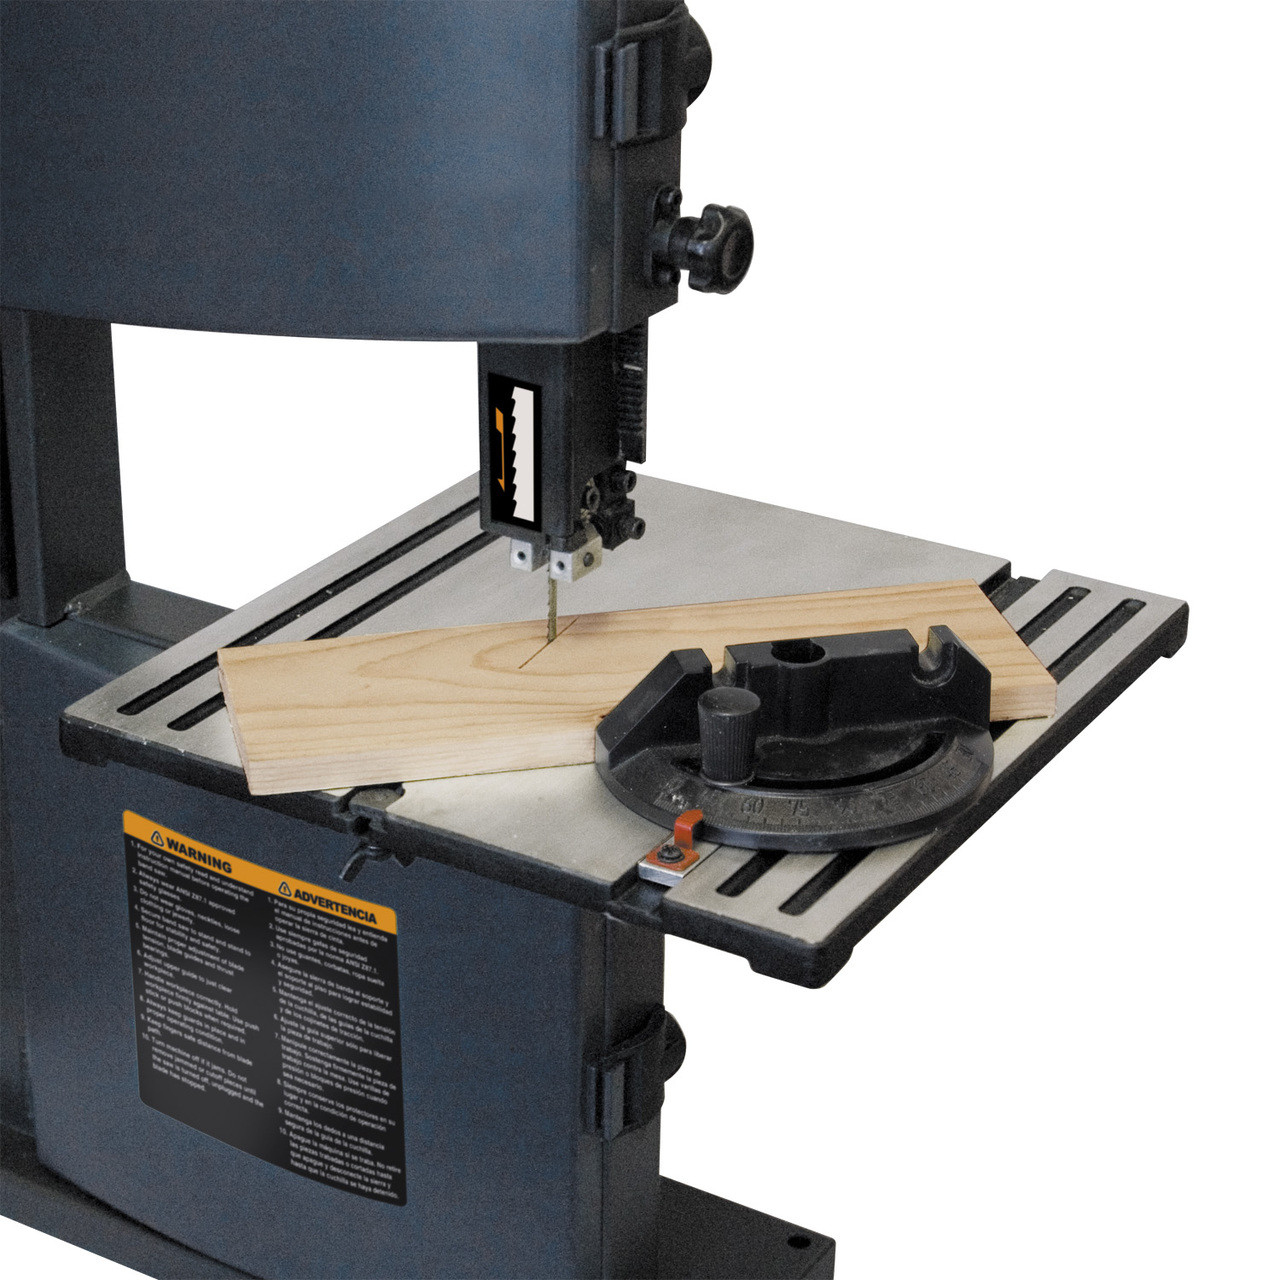 Band Saw POWERTEC Woodwork Power Tools Accessories Seller On AMZ0 